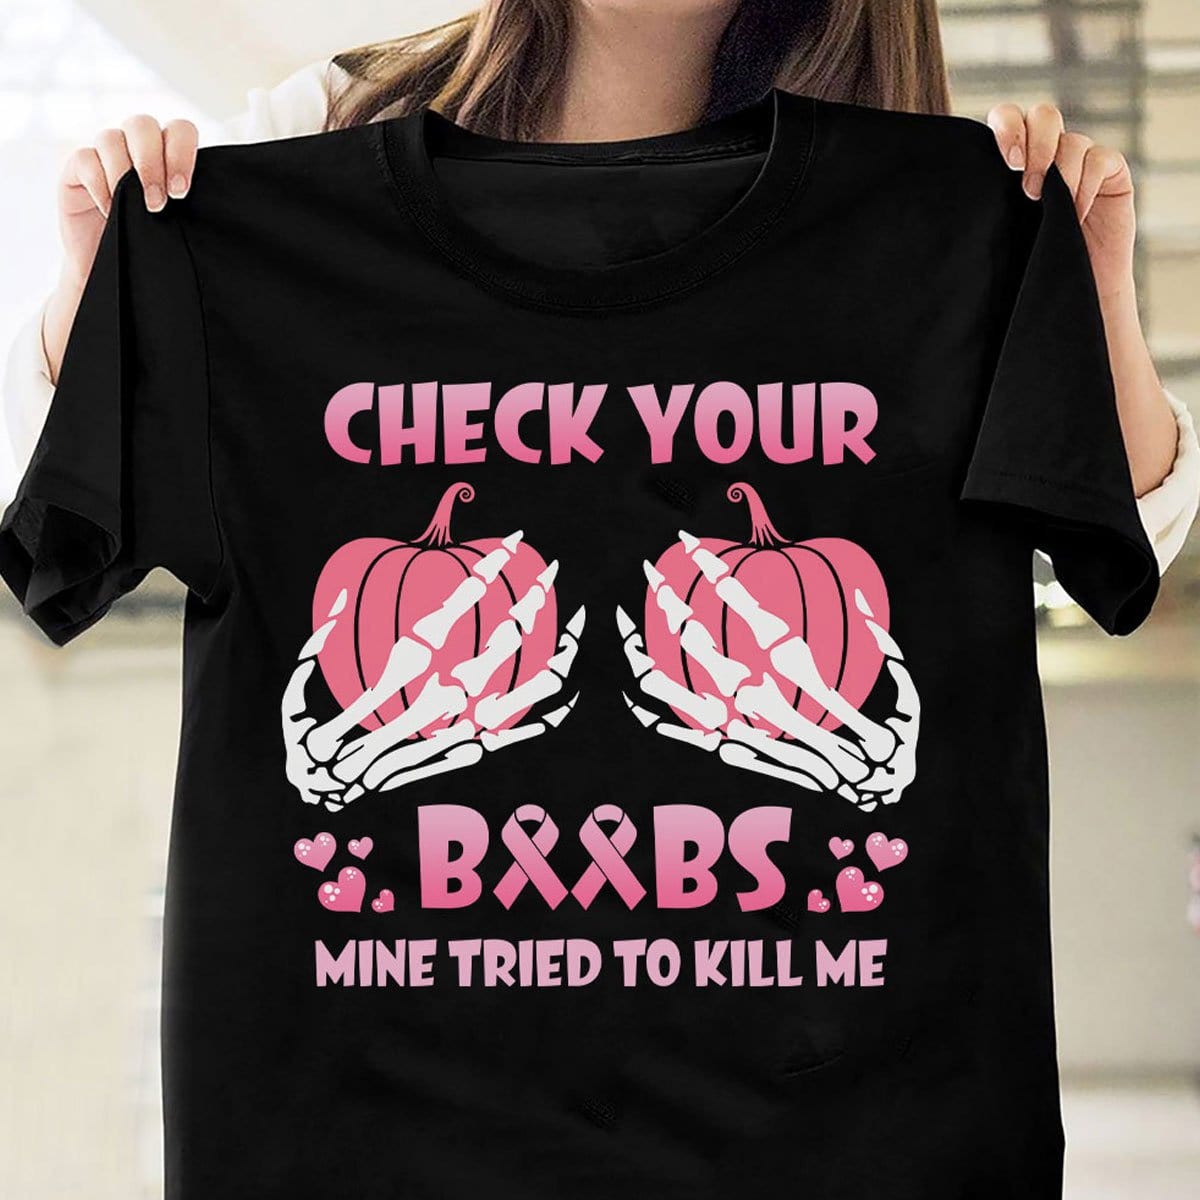 Funny Breast Cancer Shirts, Check Your Boobs, Mine Tried To Kill